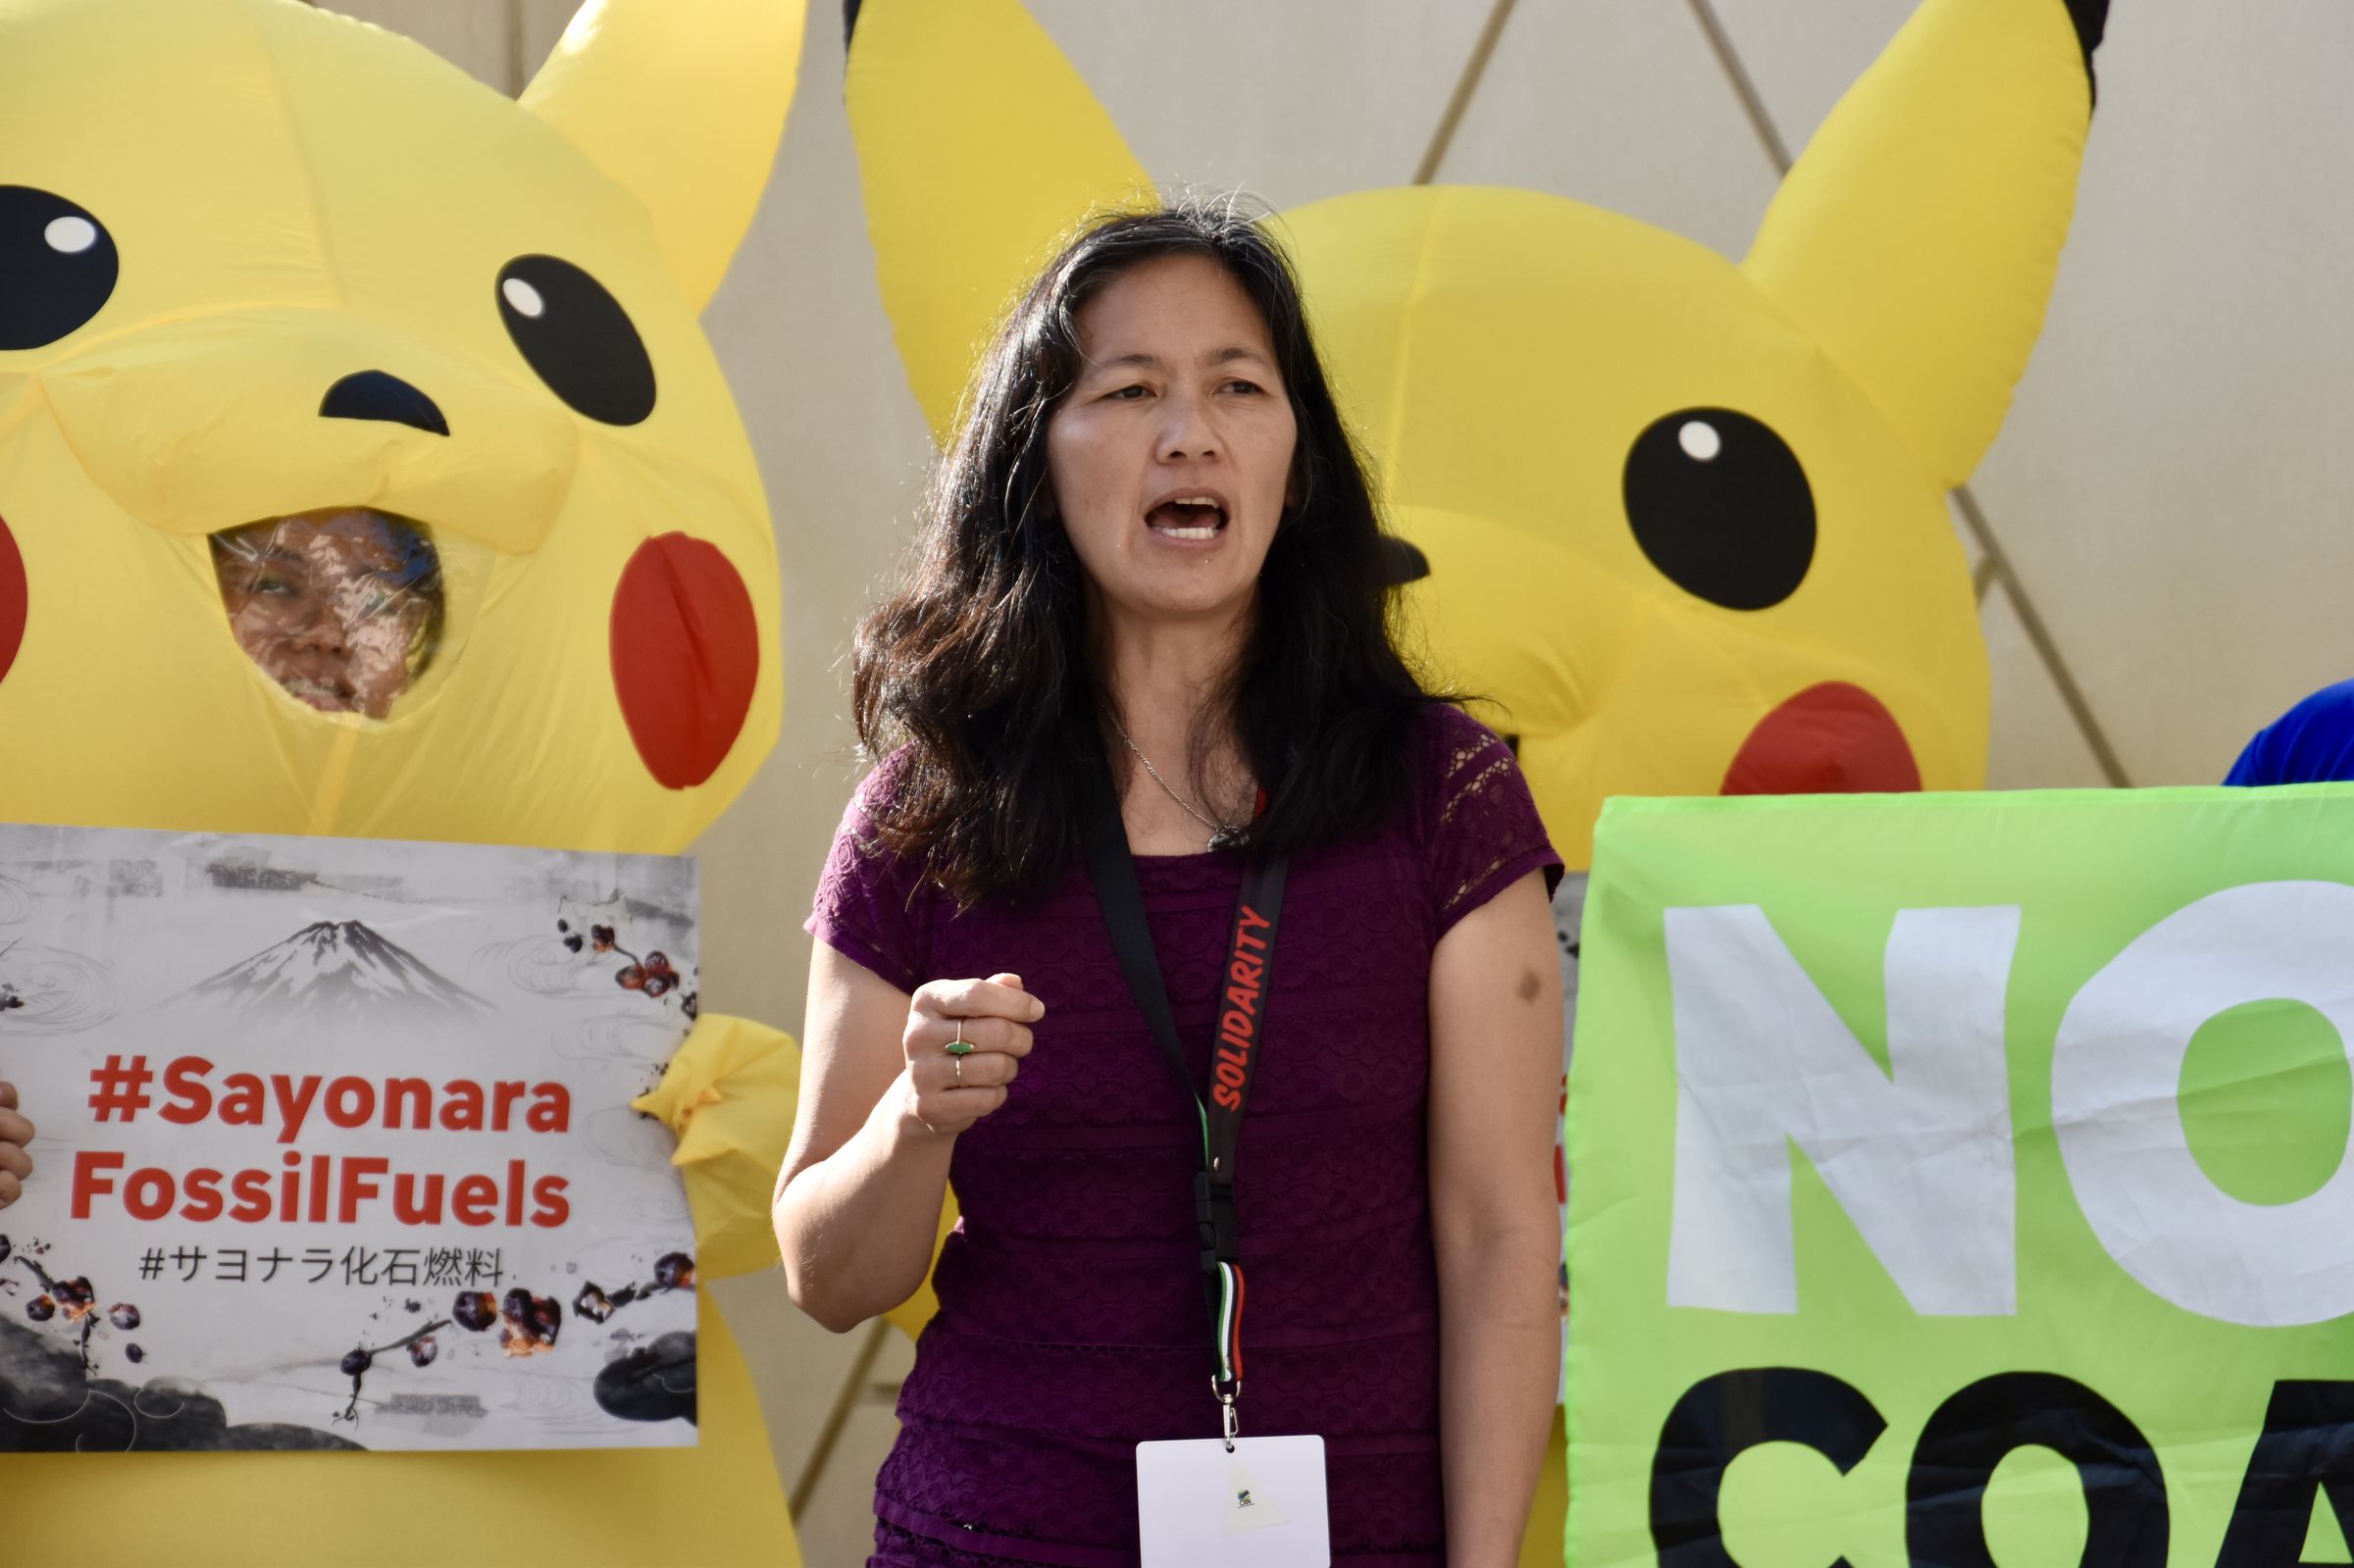 Two people wearing inflatable Pikachu costumes stand side by side behind a person speaking. One holds a sign that says “#Sayonara FossilFuels”.